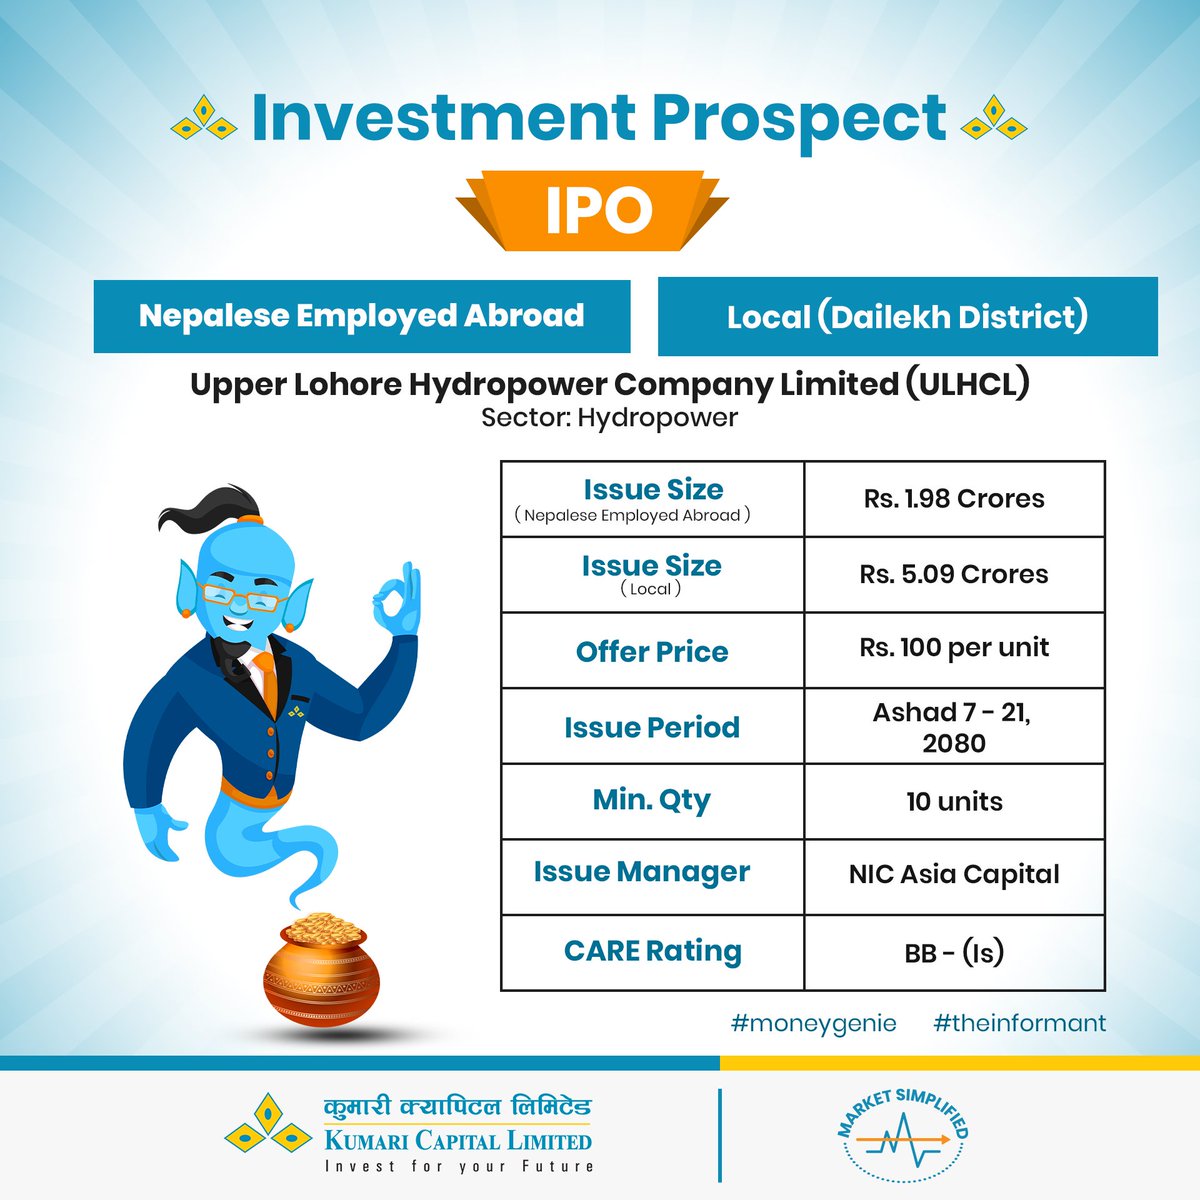 Investment Prospect: Local 7 Nepalese Employed Abroad IPO Alert!!!

IPO of Upper Lohore Hydropower Company Limited has been opened to local people of Dailekh district and Nepalese people employed abroad with secured work authorization from the Ministry of Labour from todday.